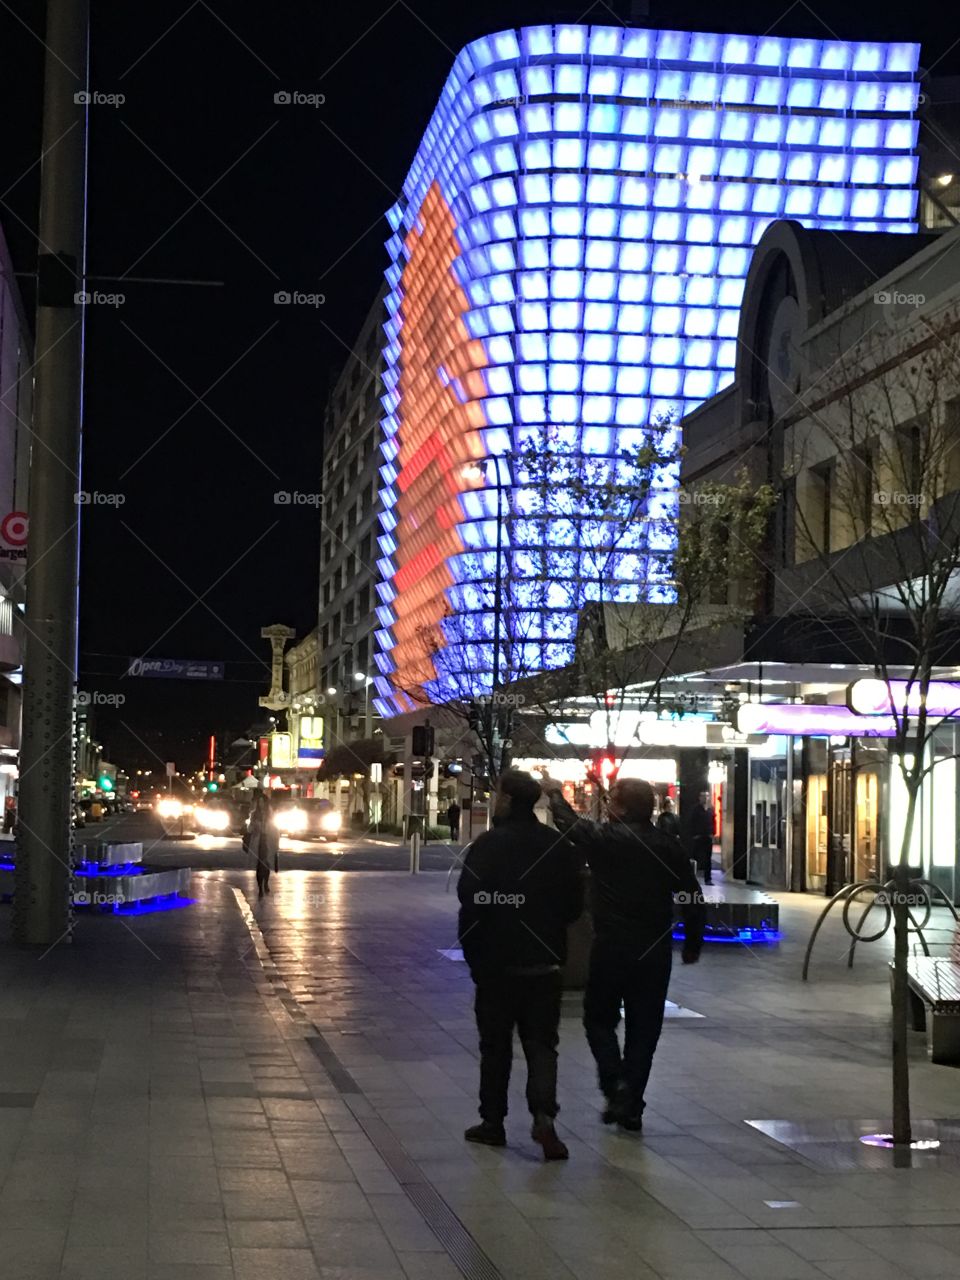 Neon city lights rundell mall Adelaide people walking near building lit up with neon lights mosaic 